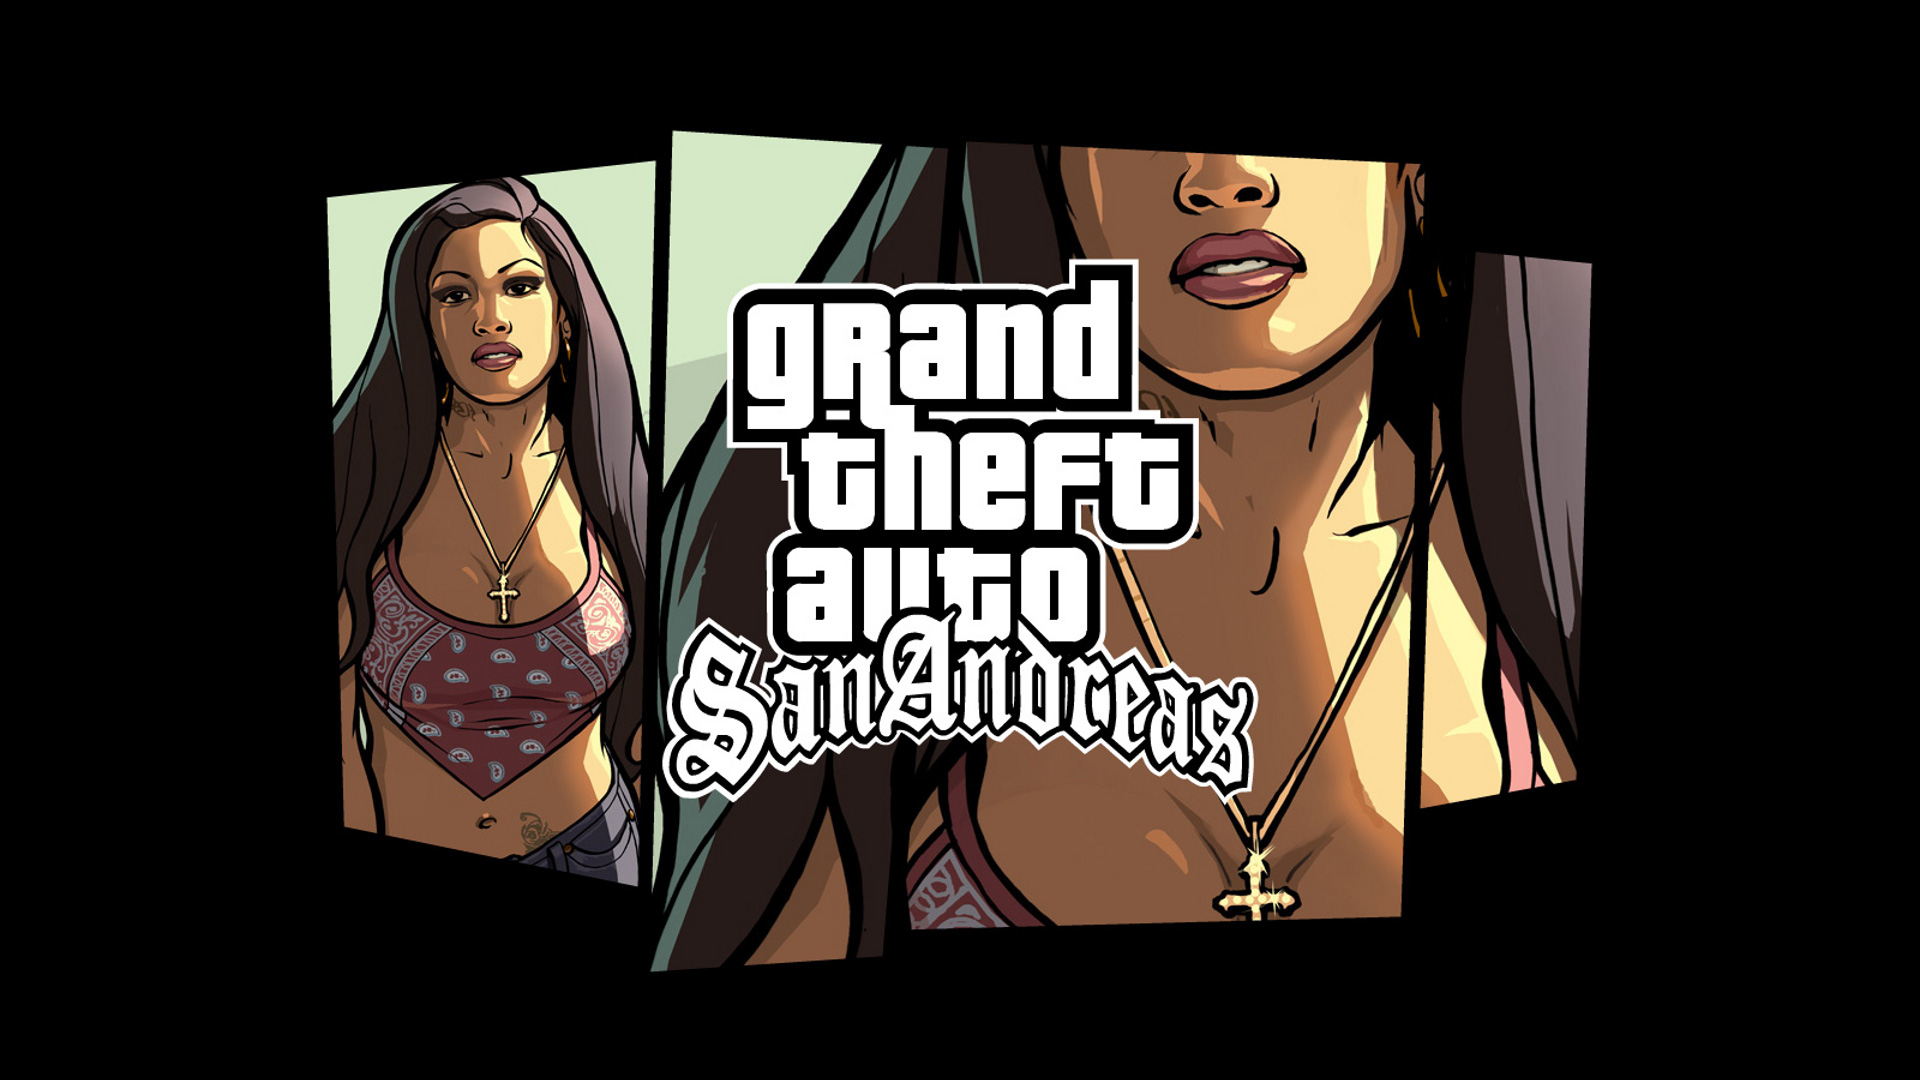 grand theft auto: san andreas, video game, brown hair, close up, cross, long hair, necklace, grand theft auto